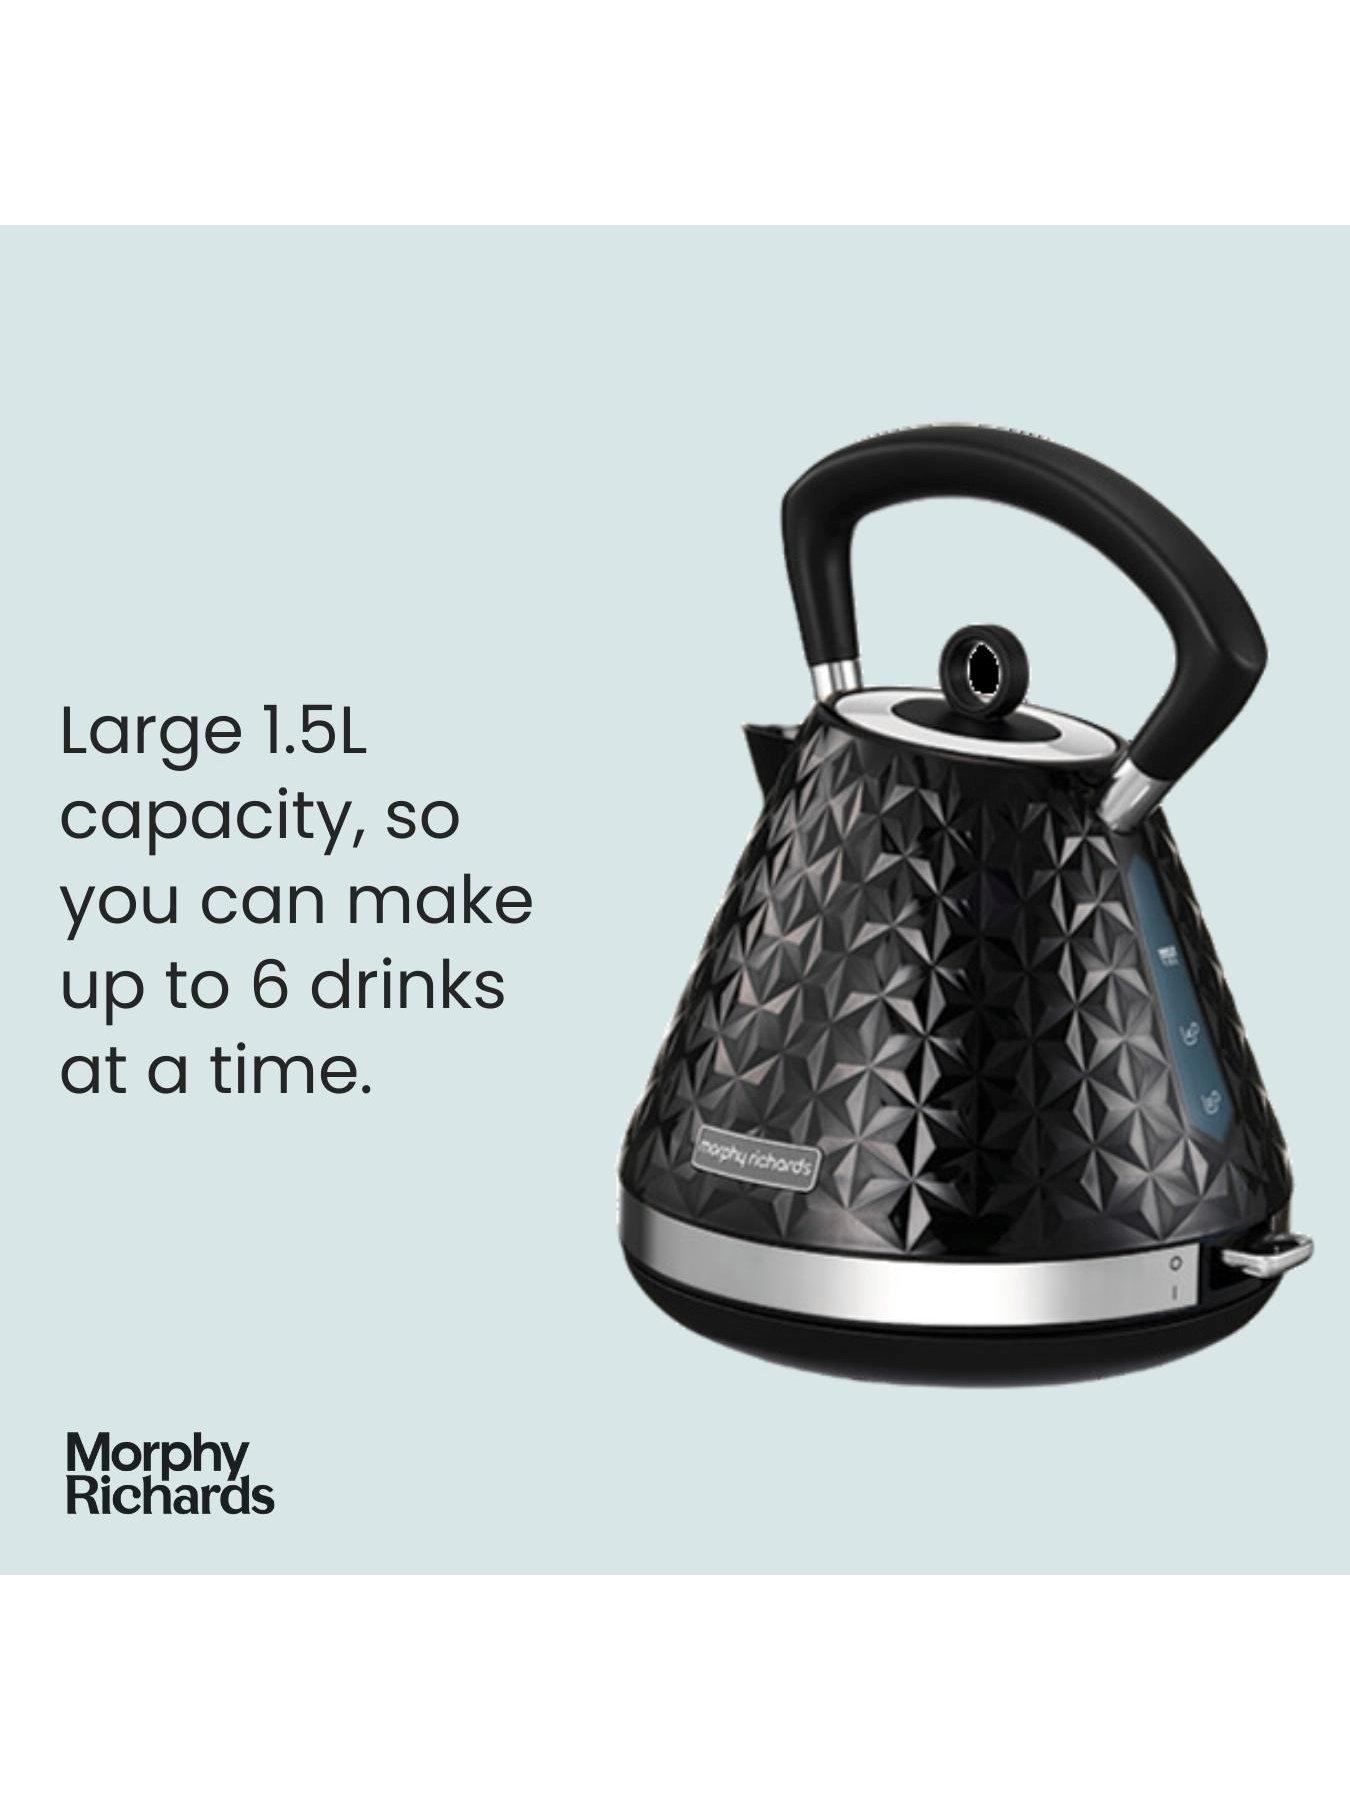 Morphy Richards Pyramid Kettle Prism 108107 Purple Electric Kettle.  .co.uk